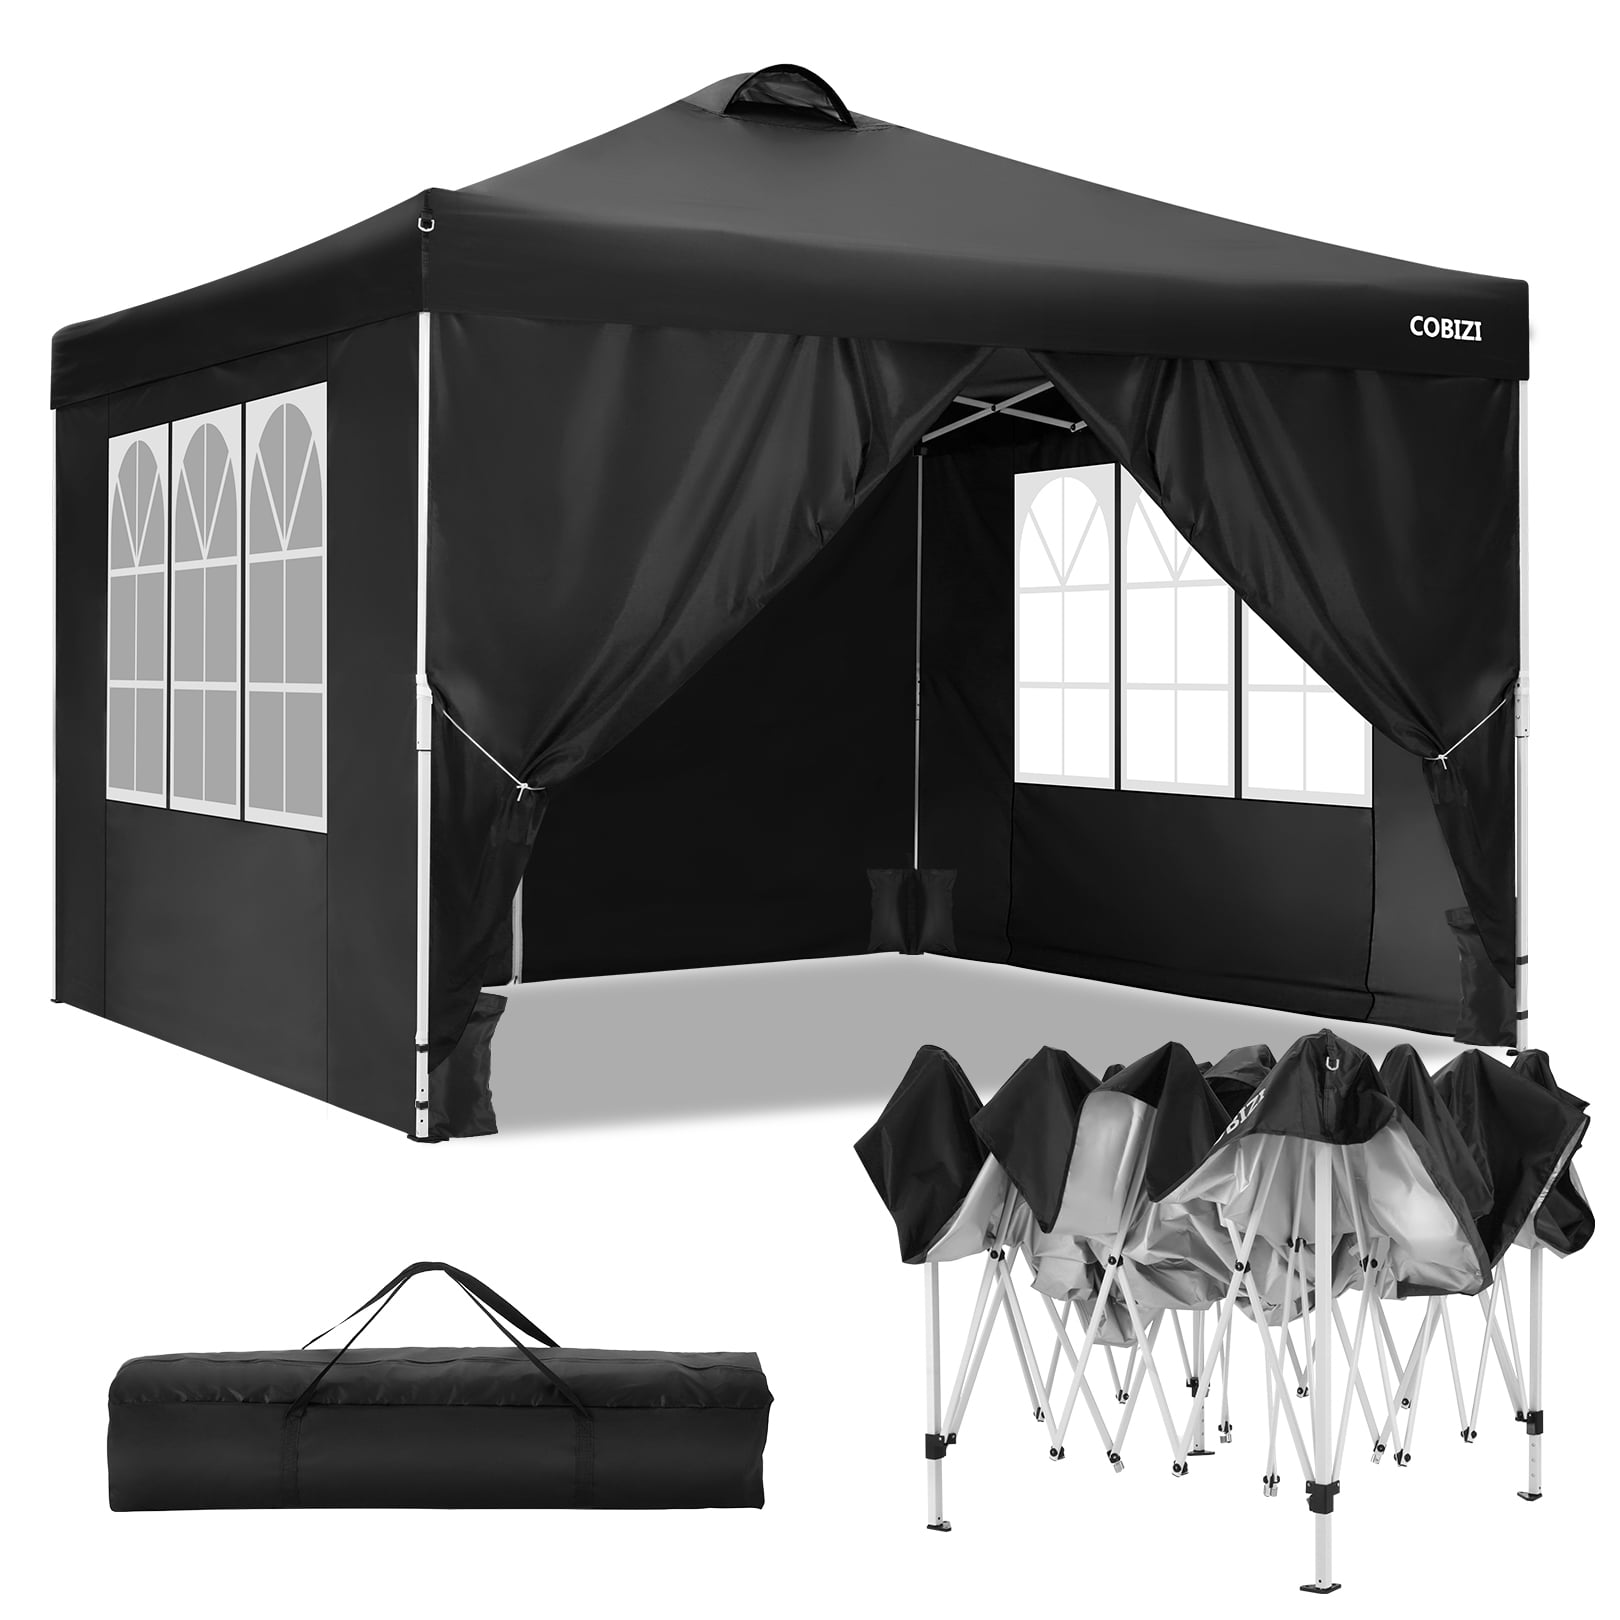 Pop up Canopy 10"x10"Foldable Waterproof Oxford Cloth Awning Tent with wind hole 